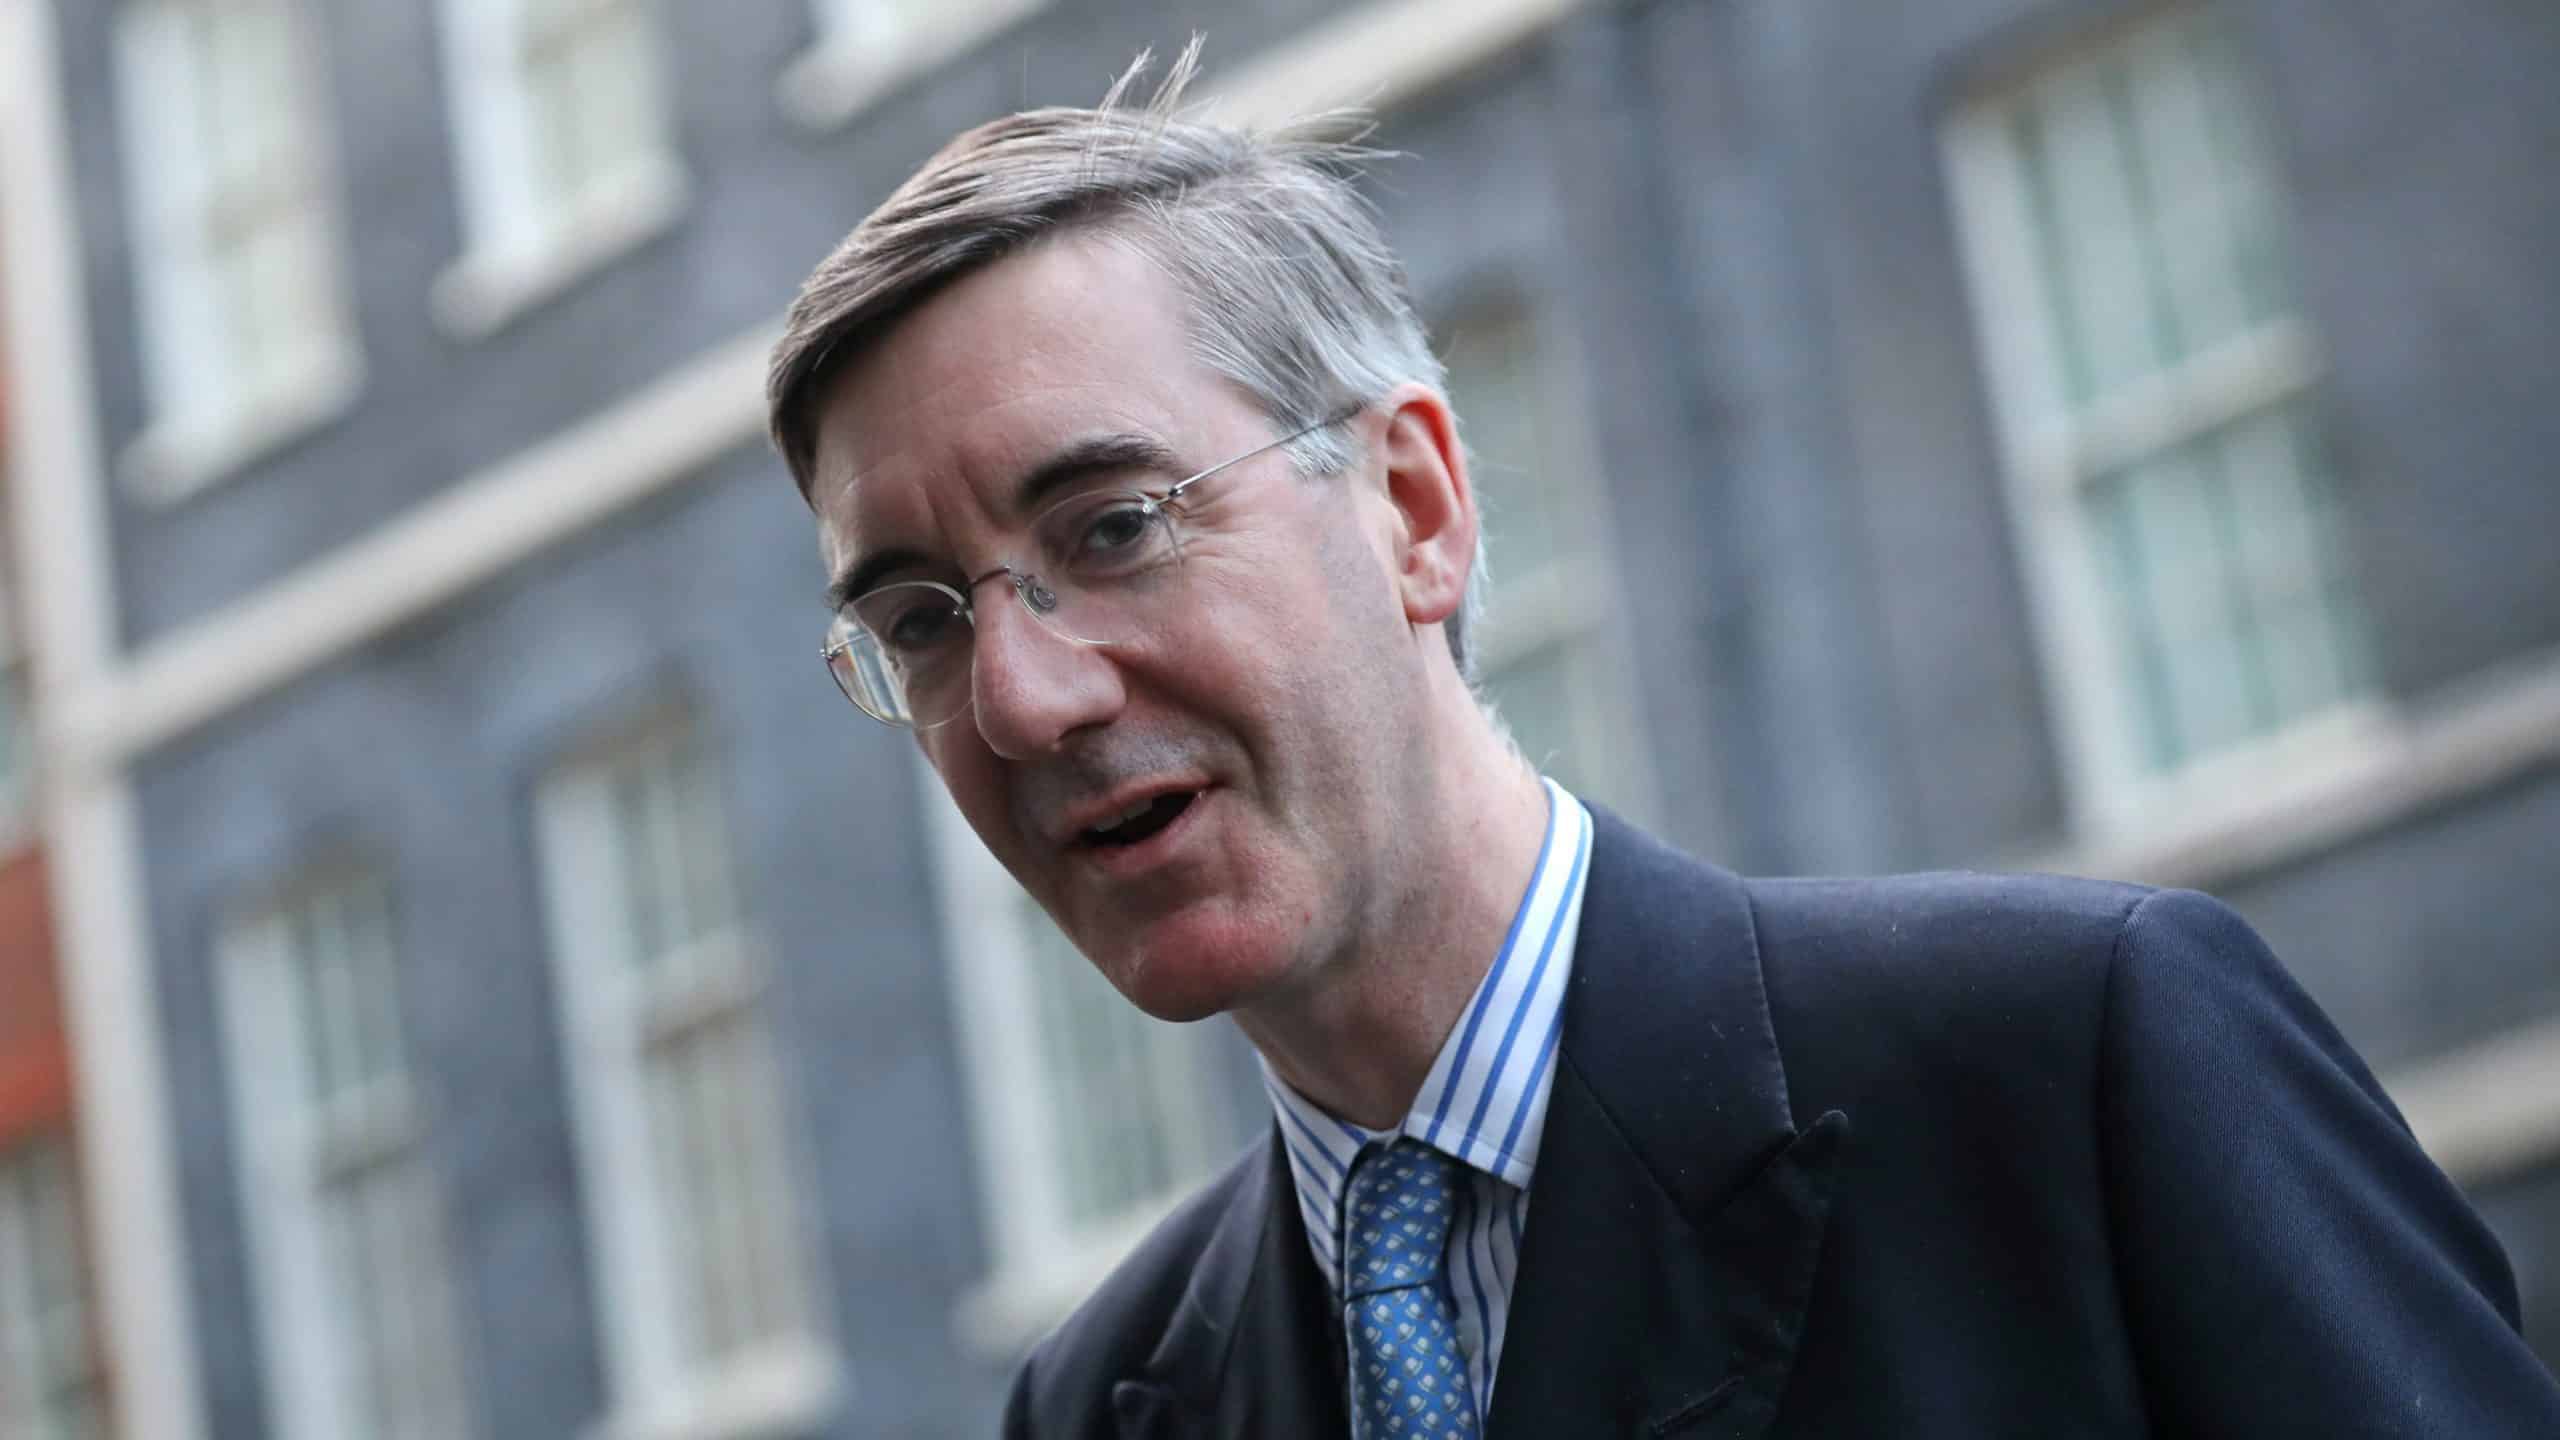 Rees-Mogg crying ‘crocodile tears’ over National Insurance rise, his own colleagues say